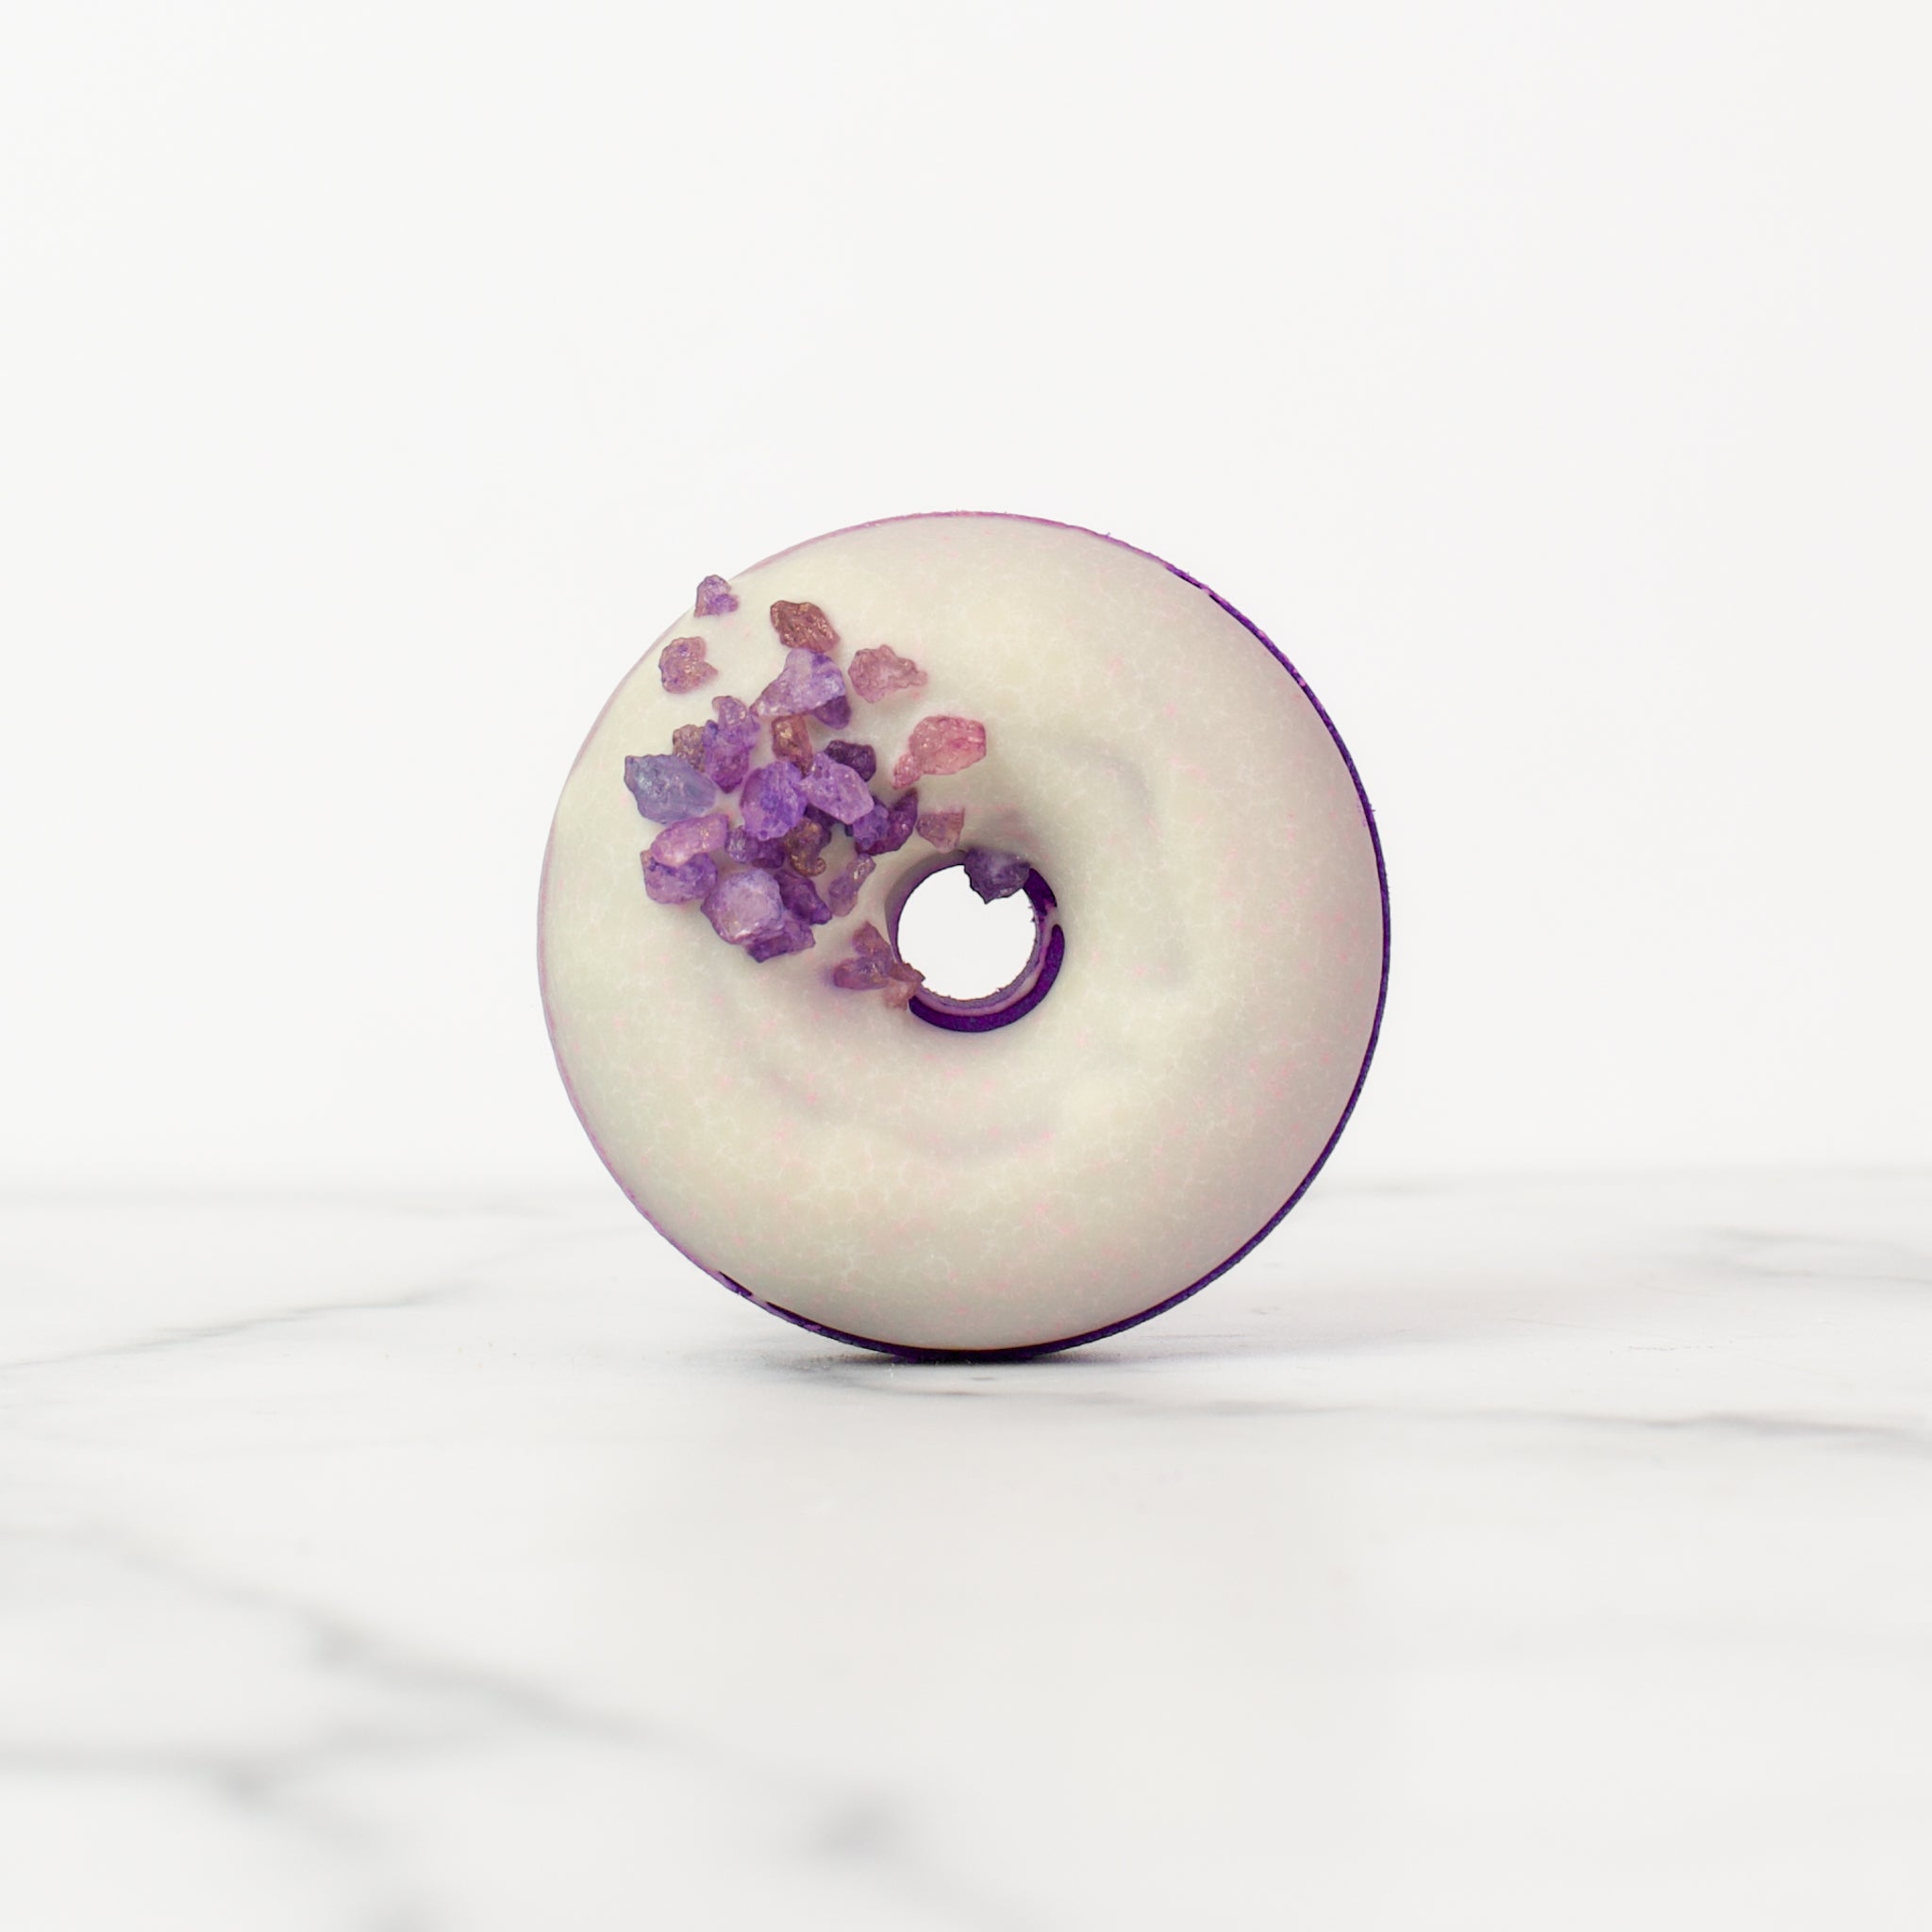 One large donut Moonflower bath bombs on a white background. Moonflower is a dark purple bath bomb with a white glaze and purple gemstone sprinkles.